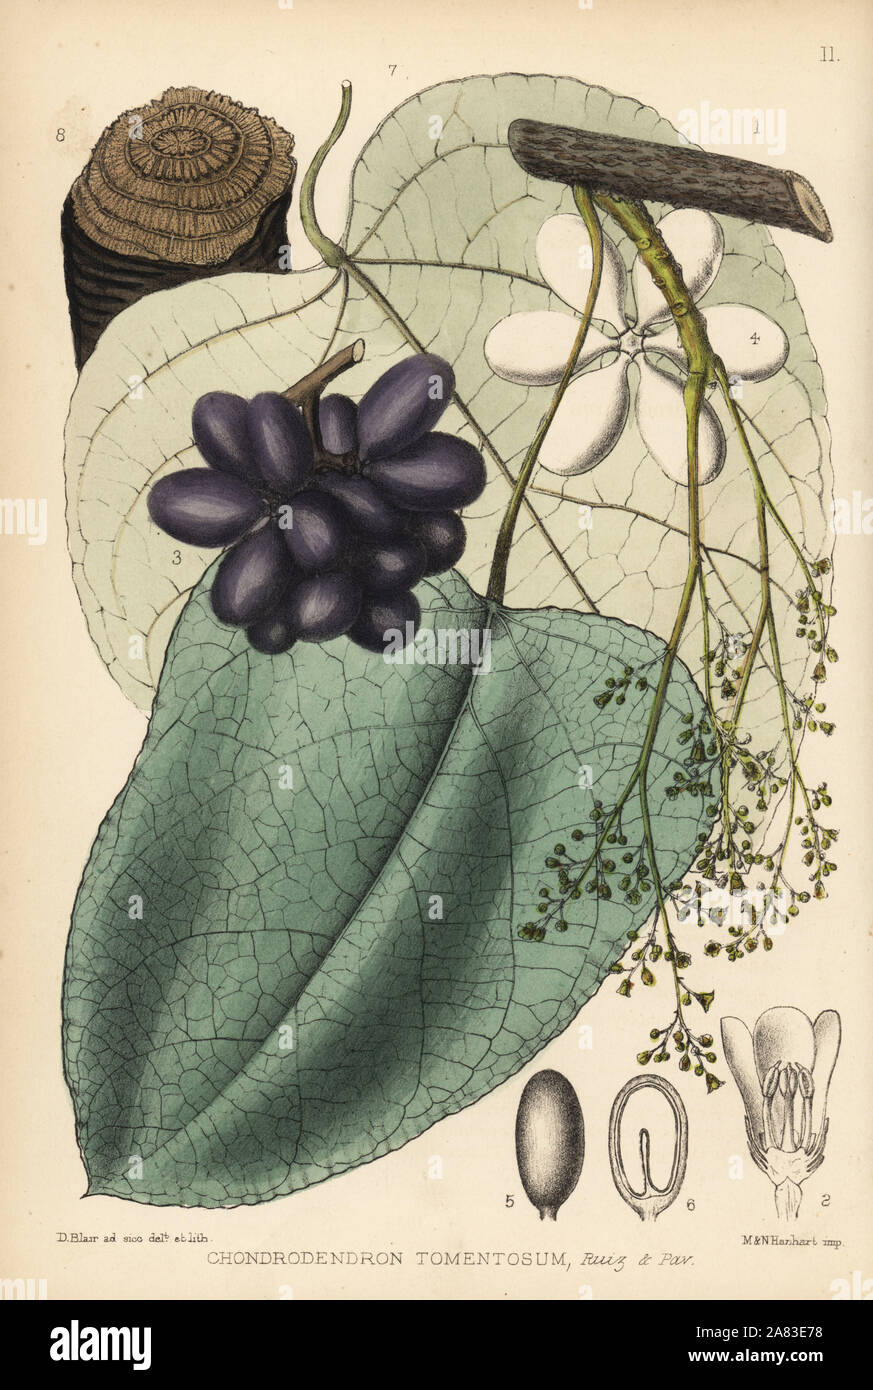 Curare, Parreira brava or abutua, Chondrodendron tomentosum. Handcoloured  lithograph by Hanhart after a botanical illustration by David Blair from  Robert Bentley and Henry Trimen's Medicinal Plants, London, 1880 Stock  Photo - Alamy